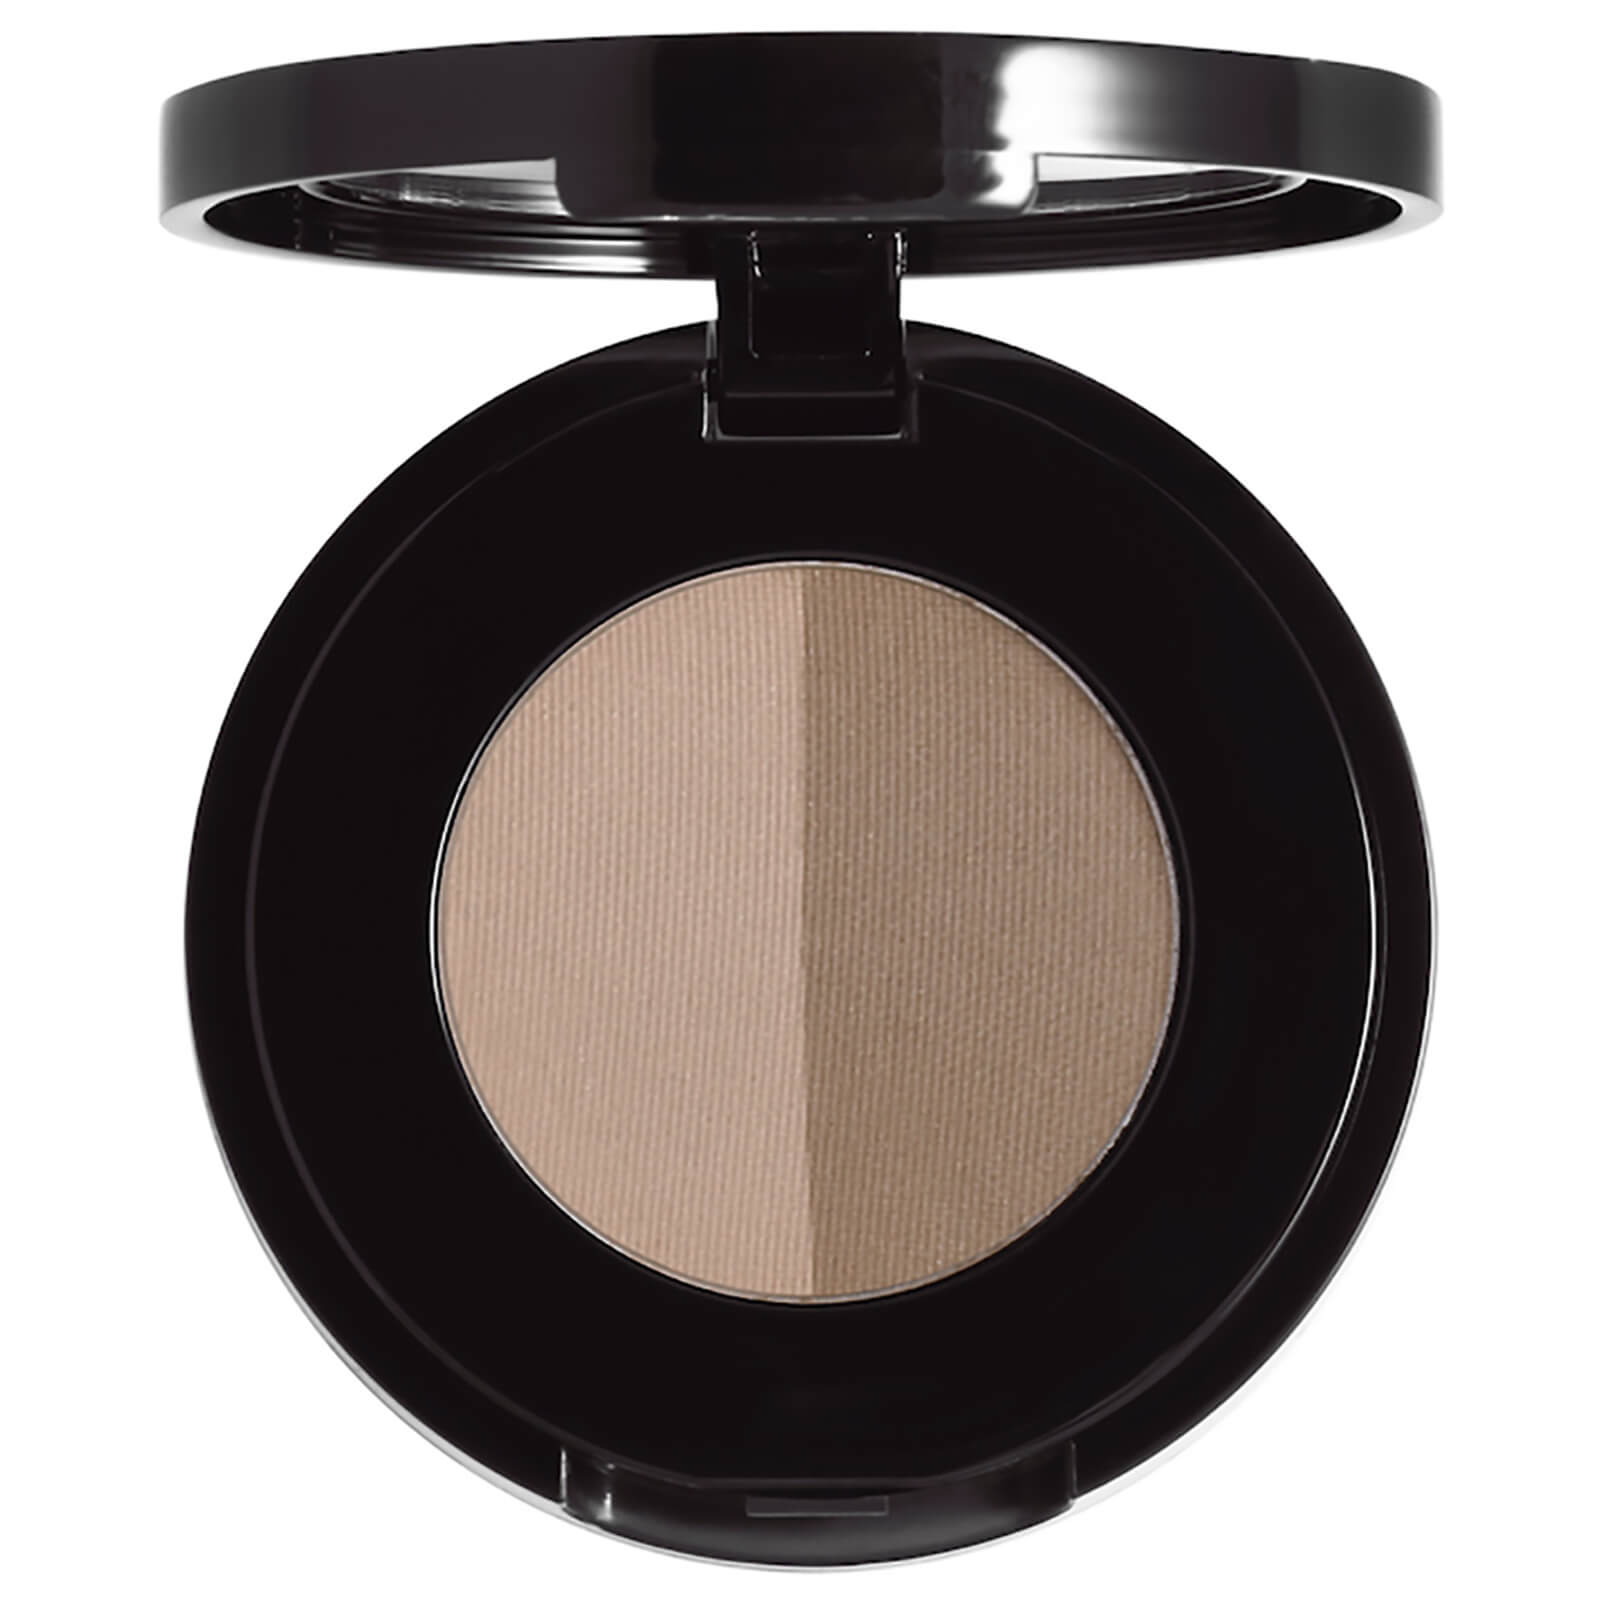 Anastasia Beverly Hills Brow Powder Duo 1.6g (Various Shades) - Taupe